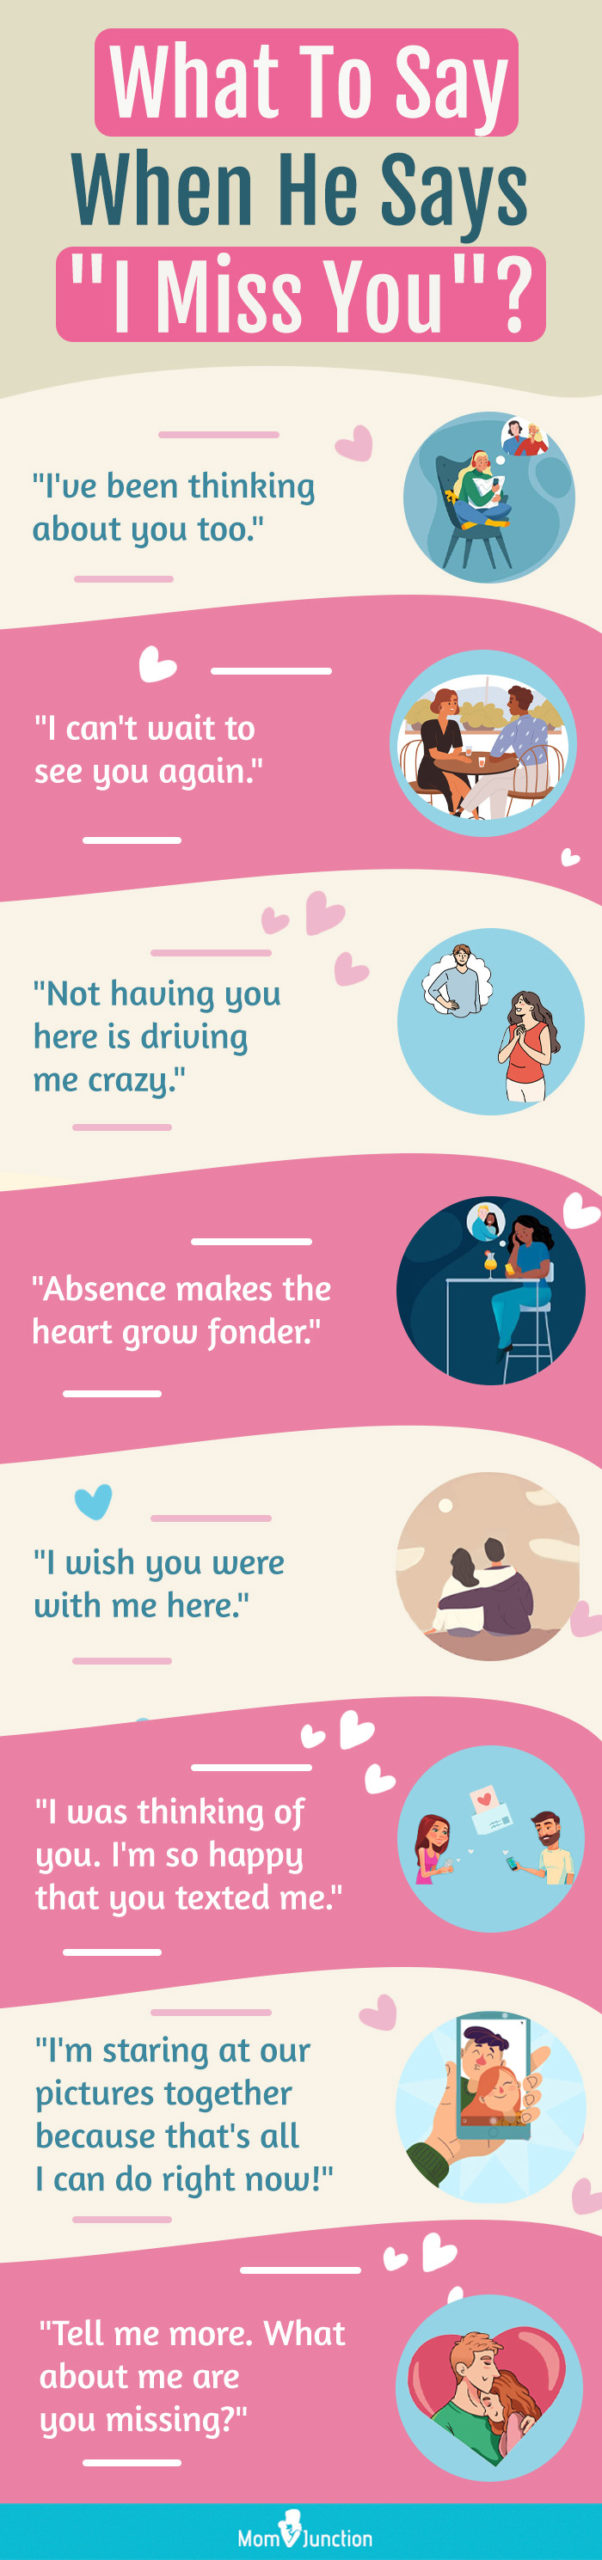 what to say when he says i miss you [infographic]